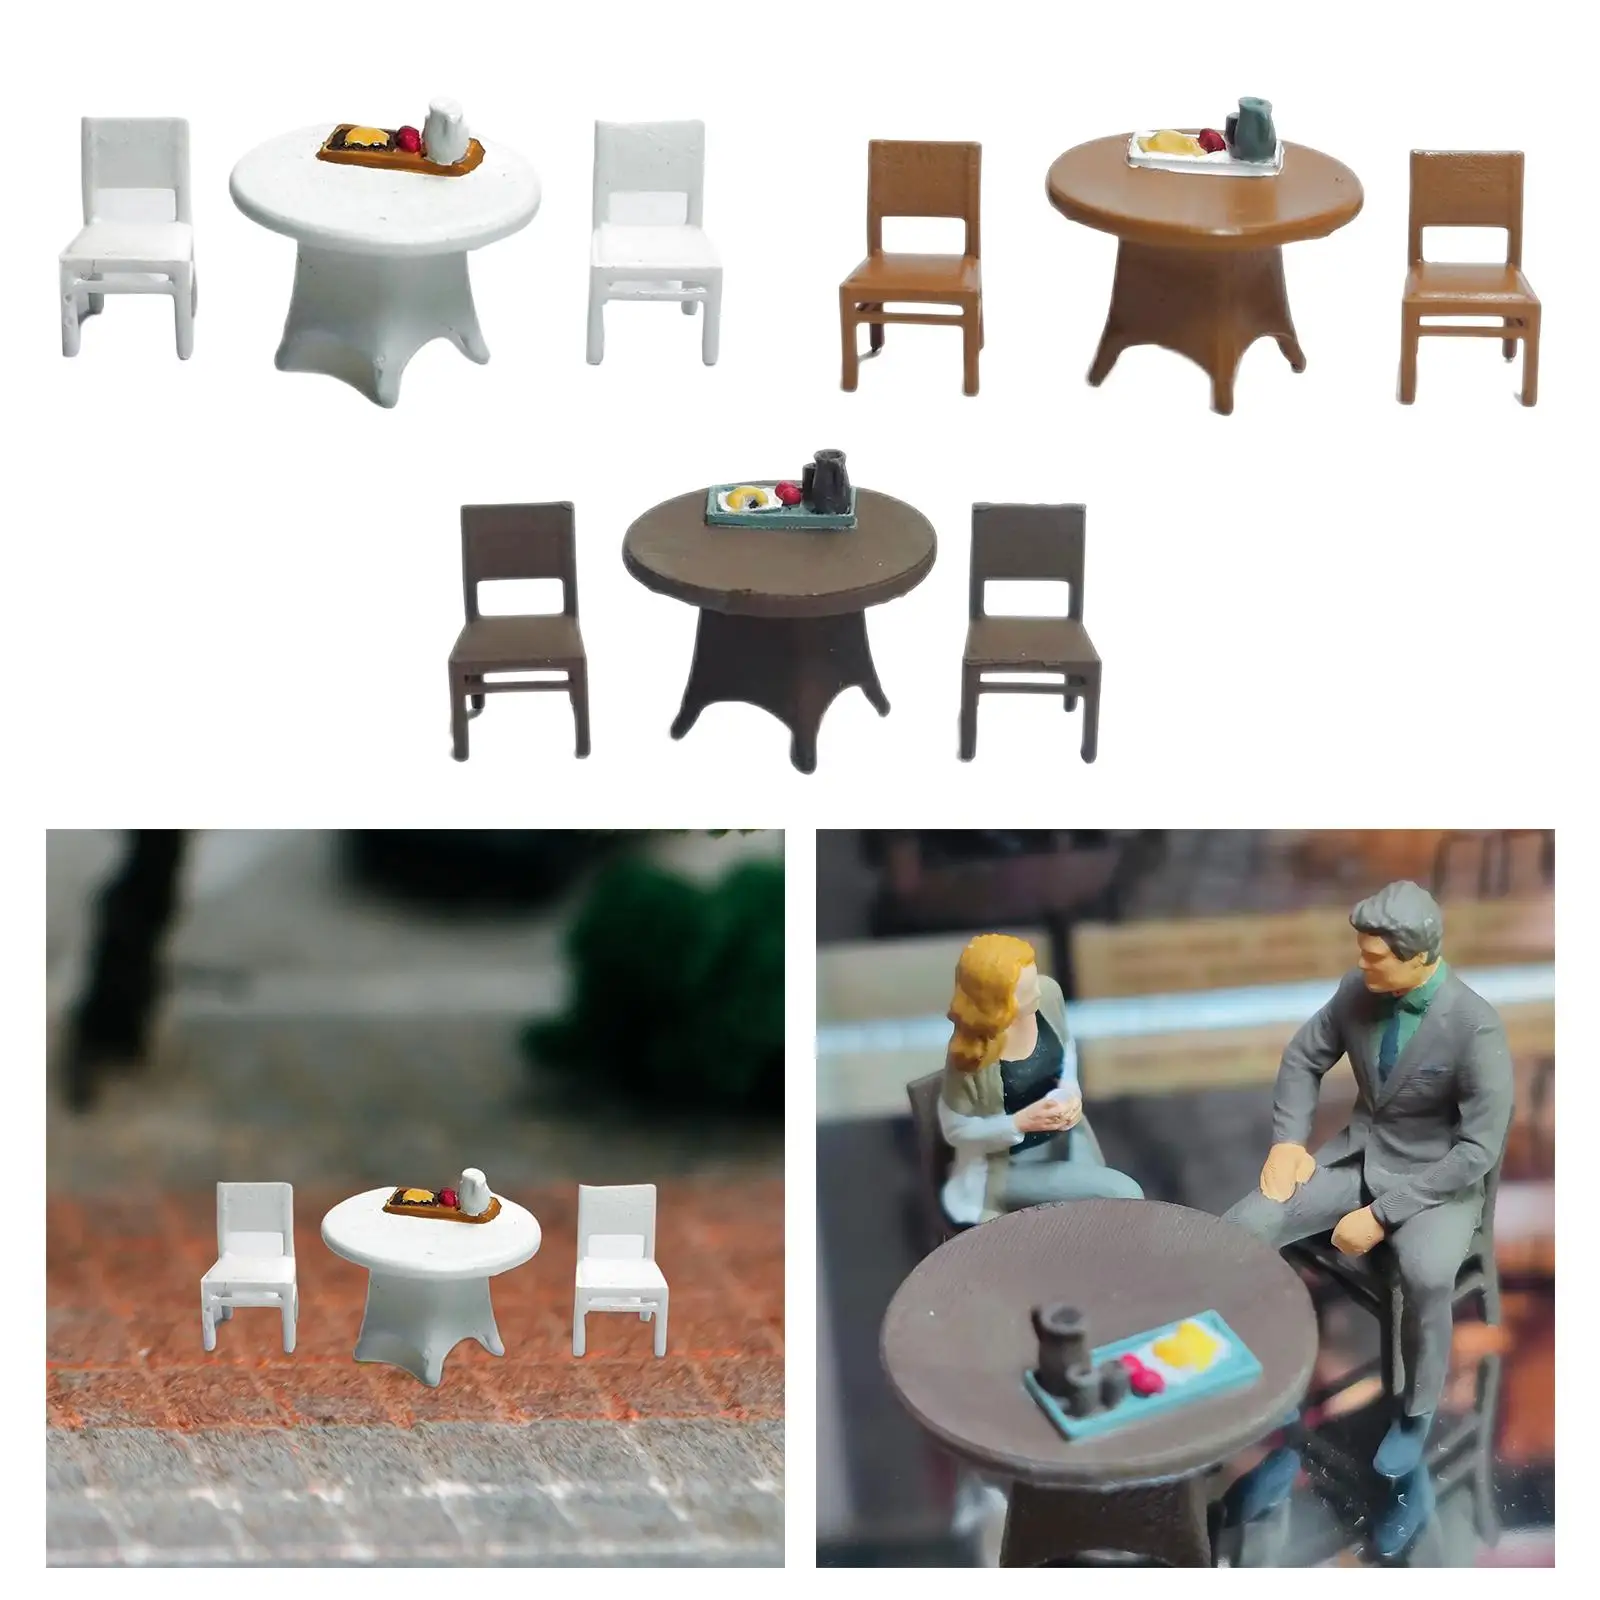 3Pcs Hand Painted 1/64 Table and Chair Model with Food Tray Miniature Scenes Decor